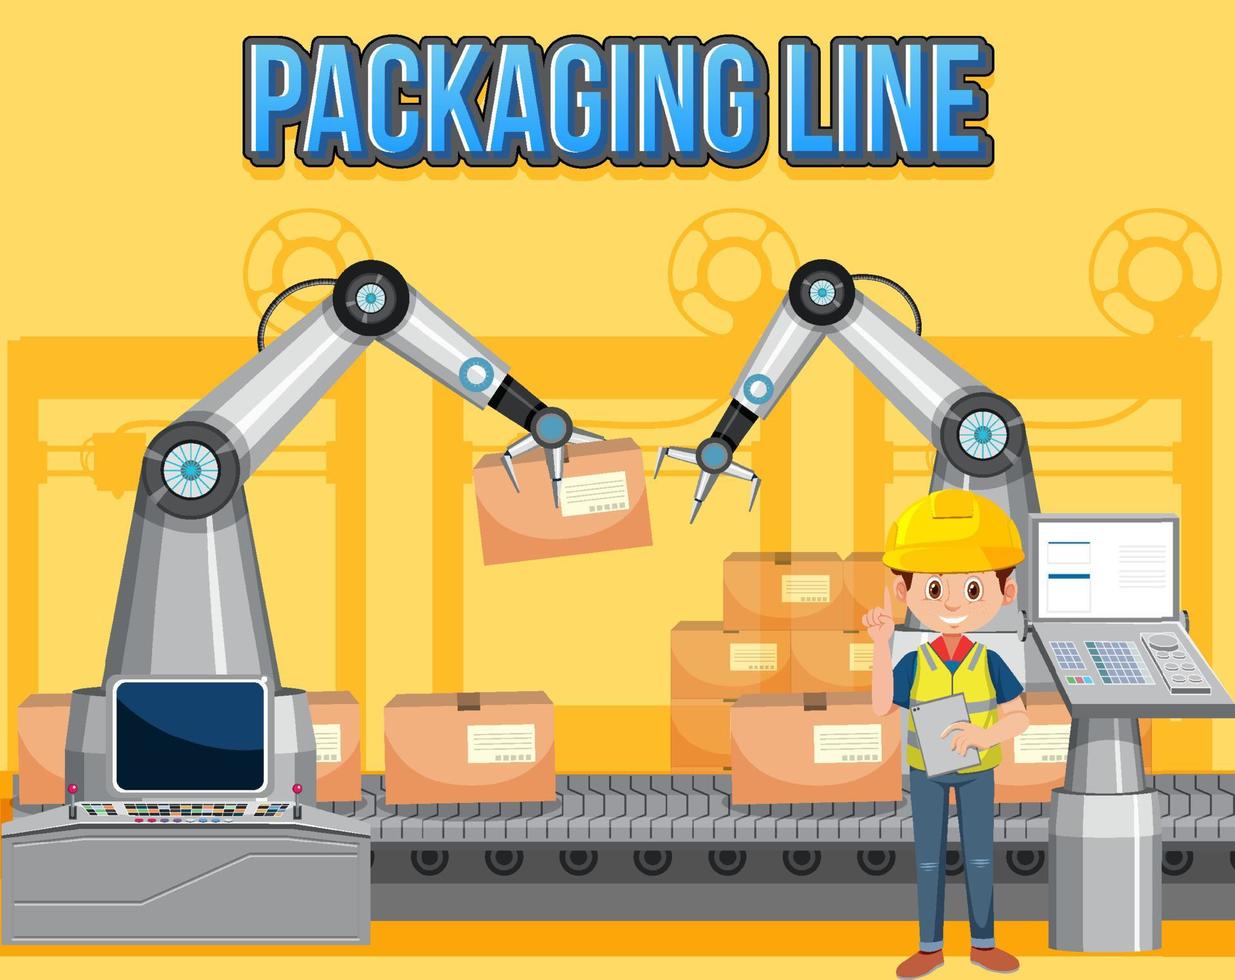 Packaging process with packaging line banner vector